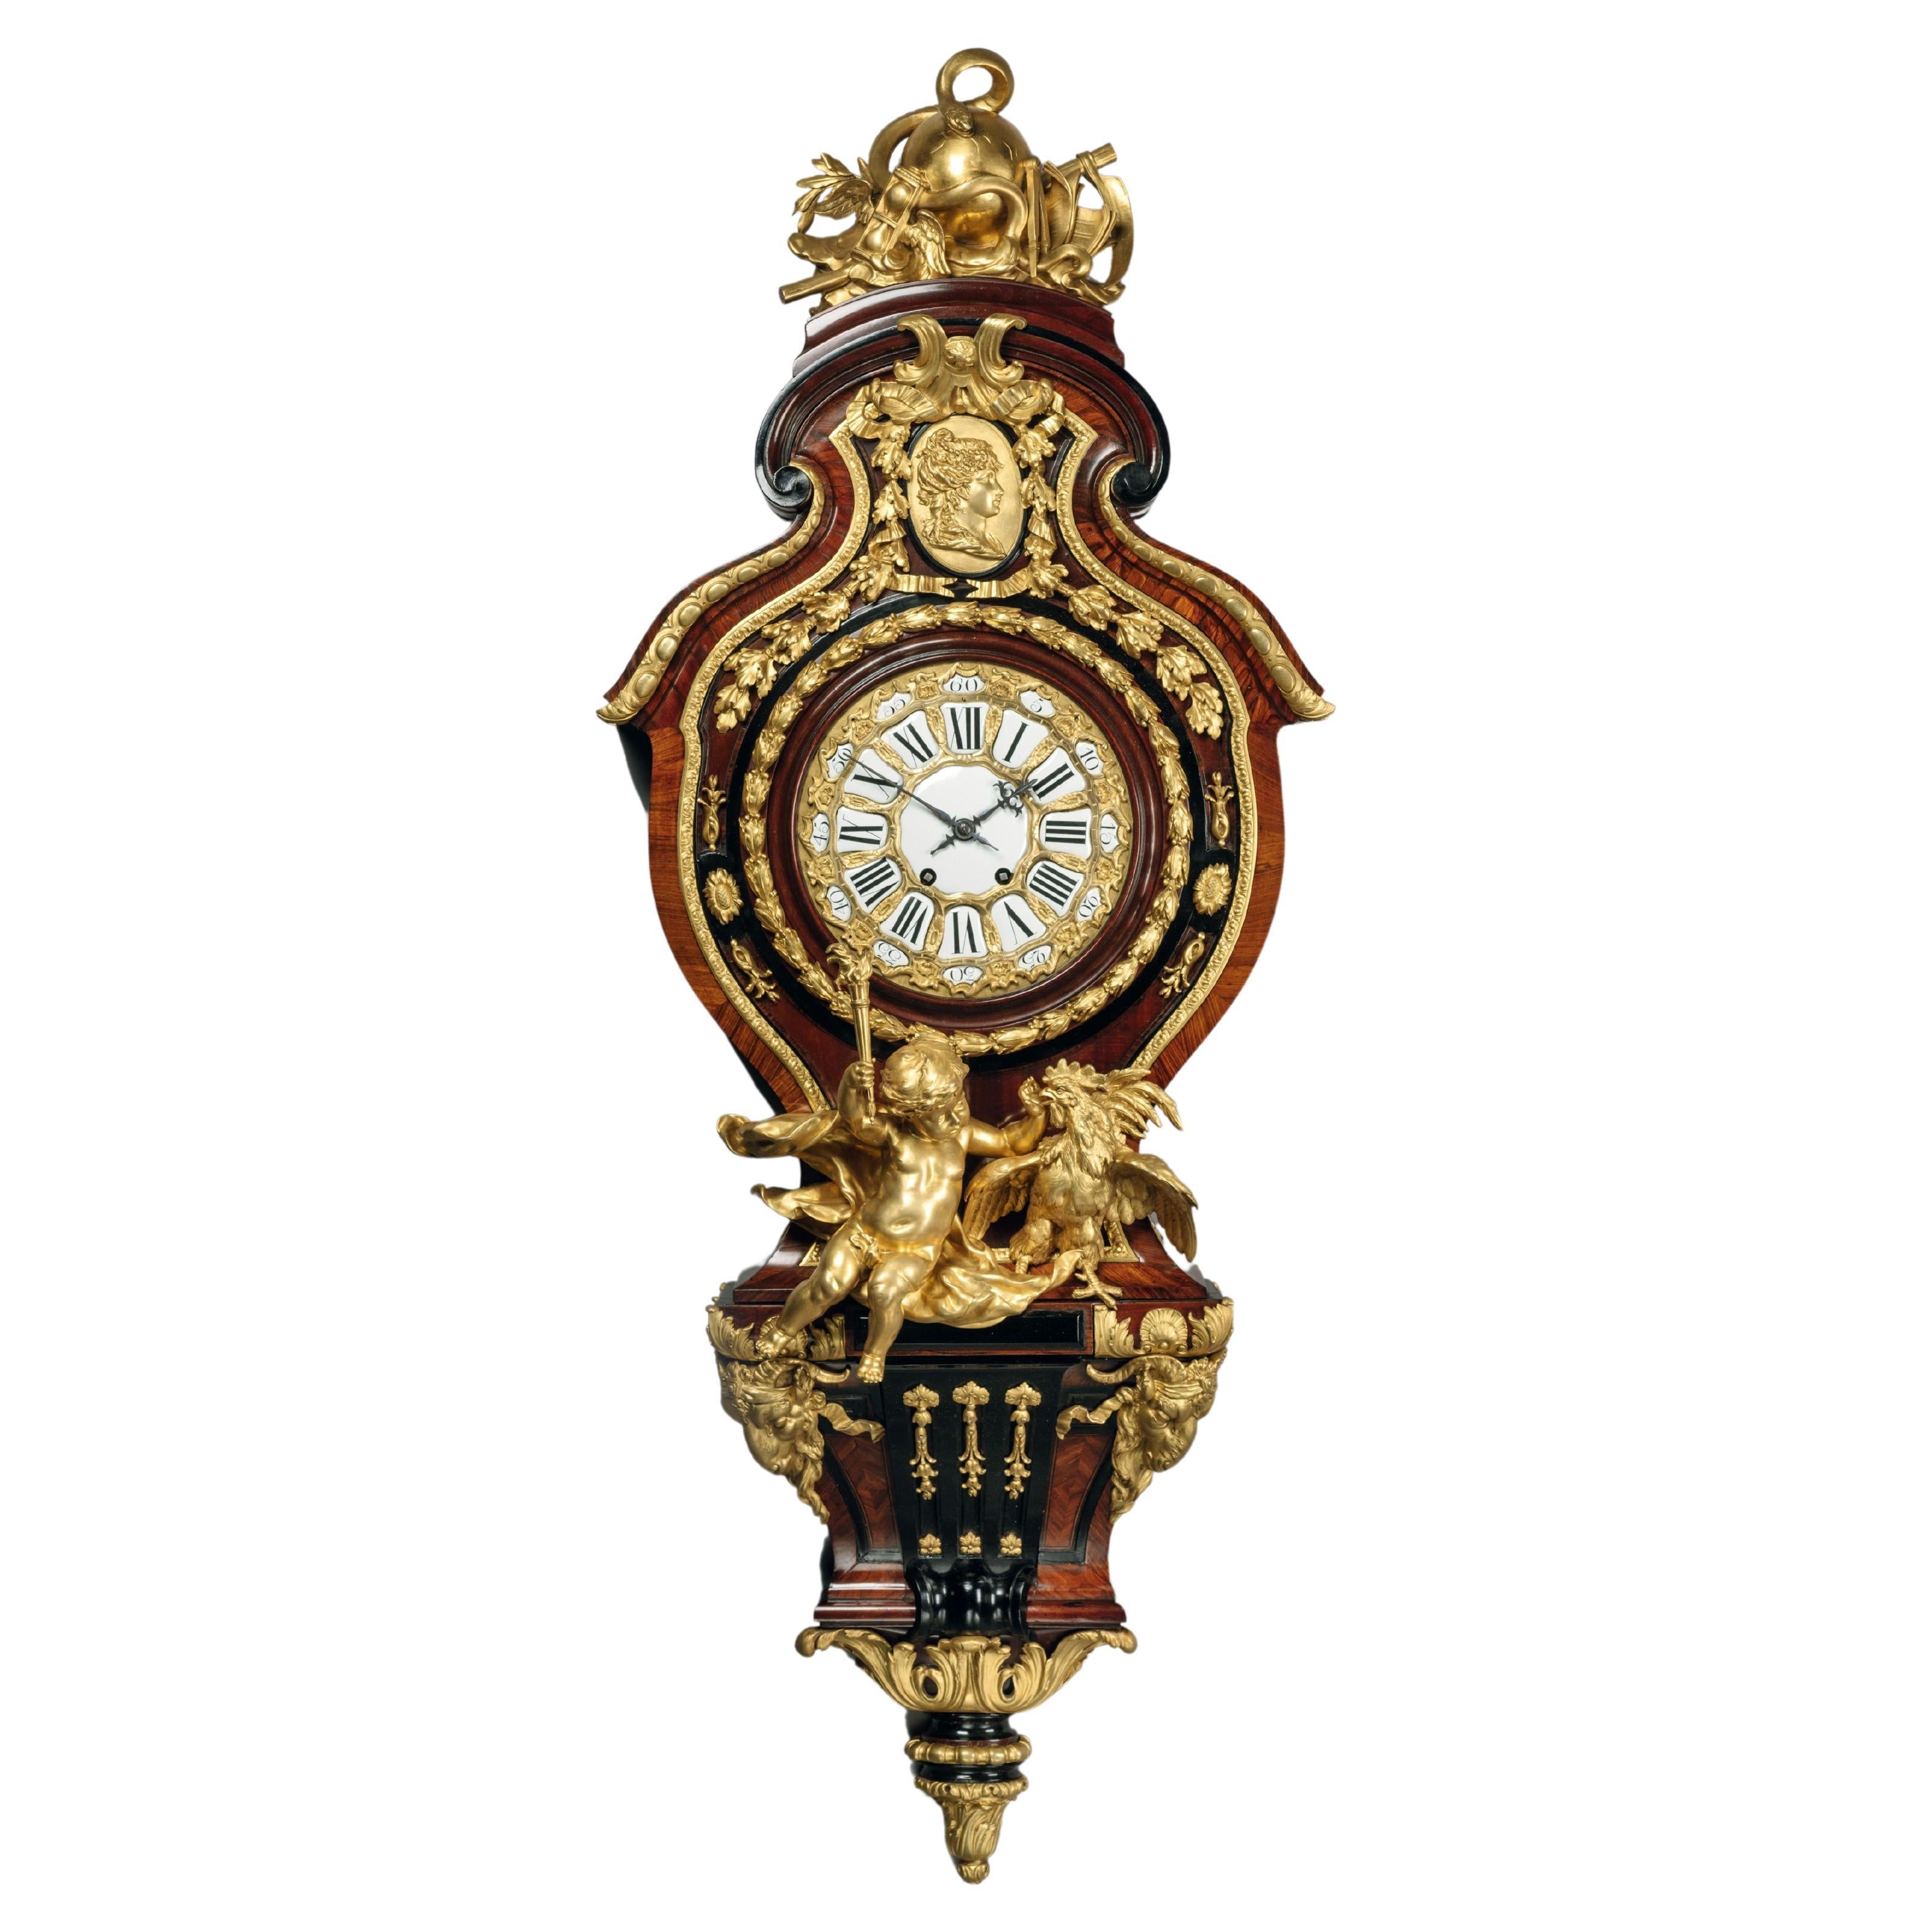 Grand Figural Cartel Clock, After a Design by Gilles-Marie Oppenord